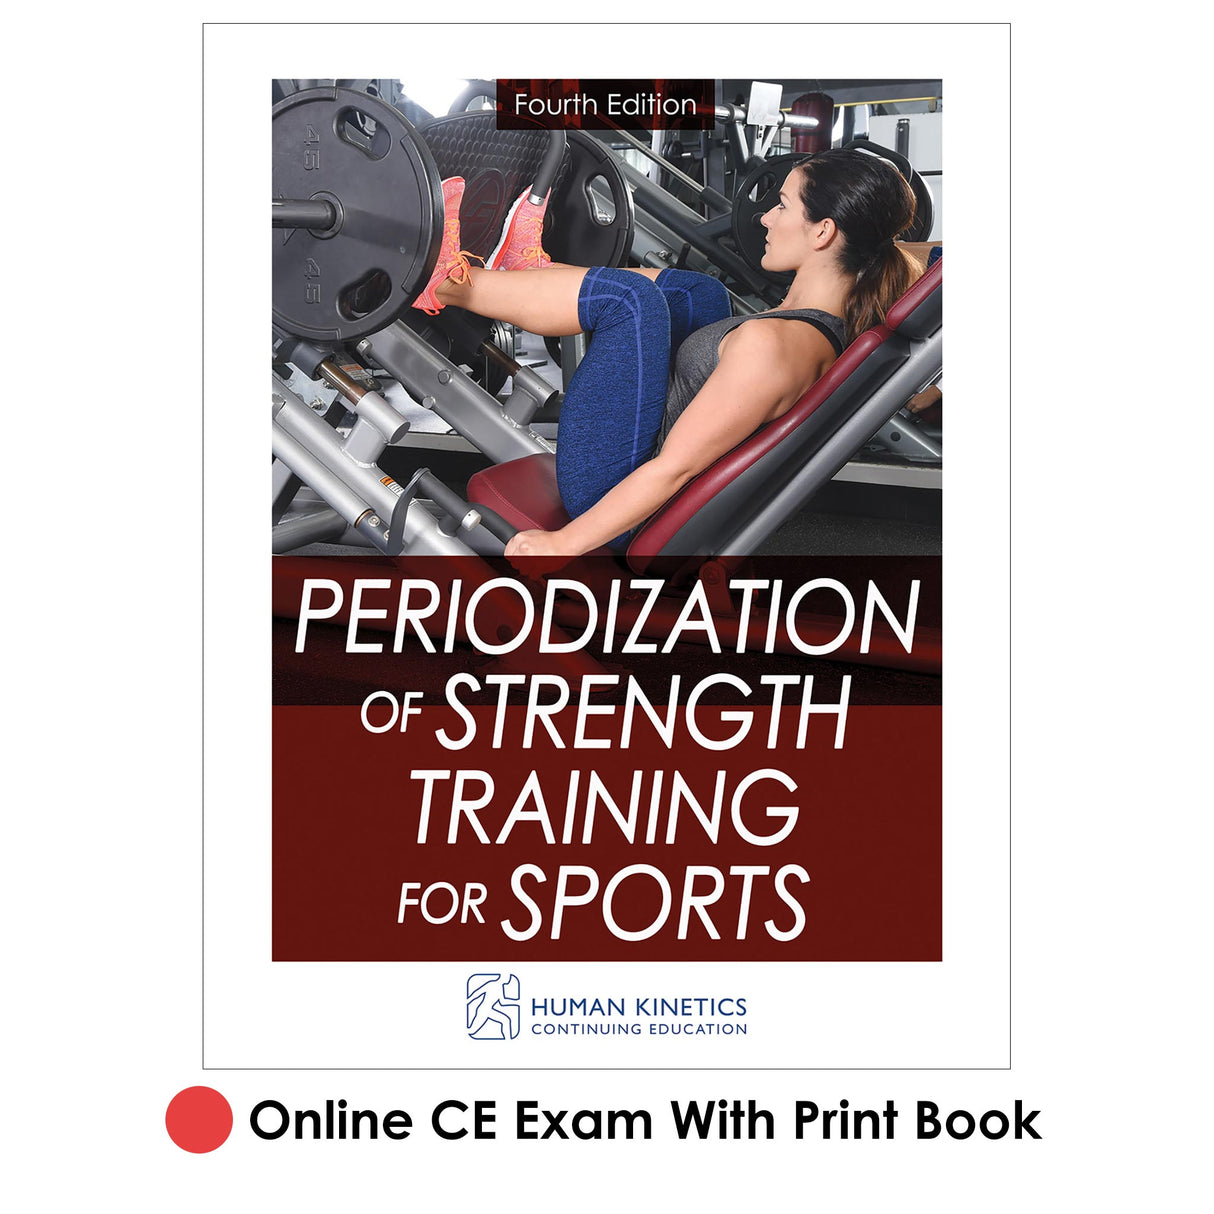 Periodization of Strength Training for Sports 4th Edition Online CE Exam With Print Book